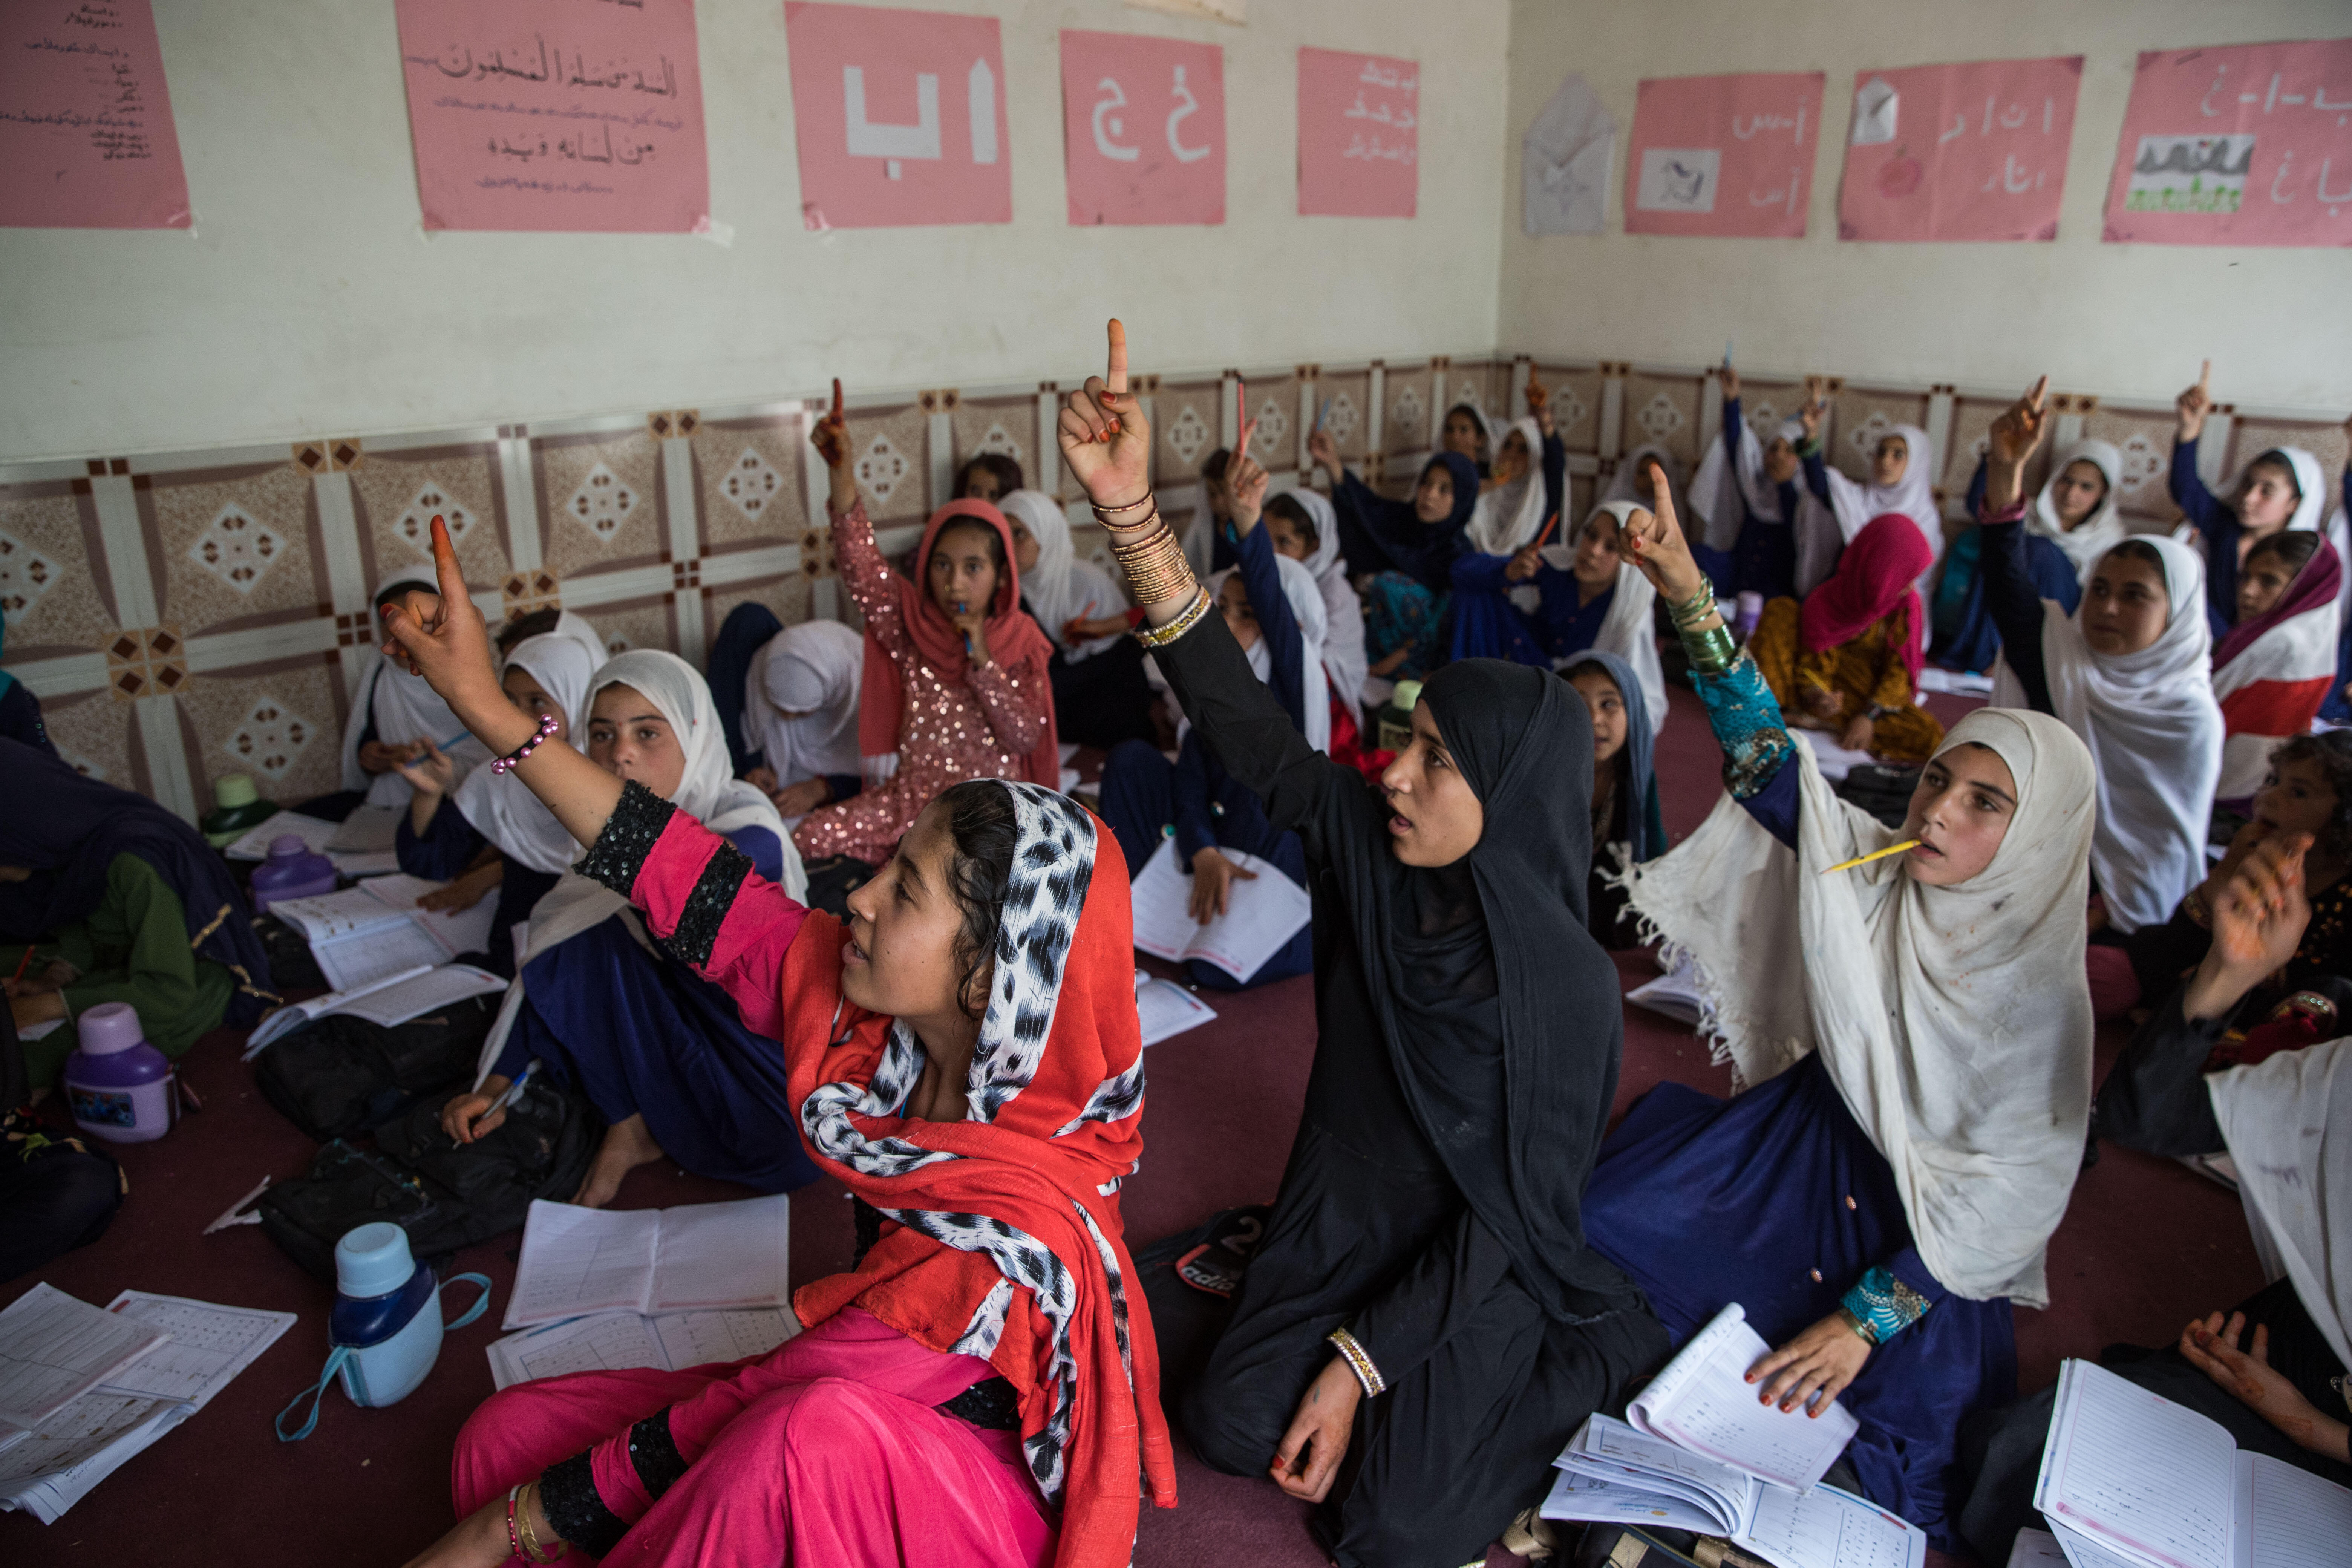 Girls sitting on the floor raise their hands in an IRC community education program in Afghanistan 